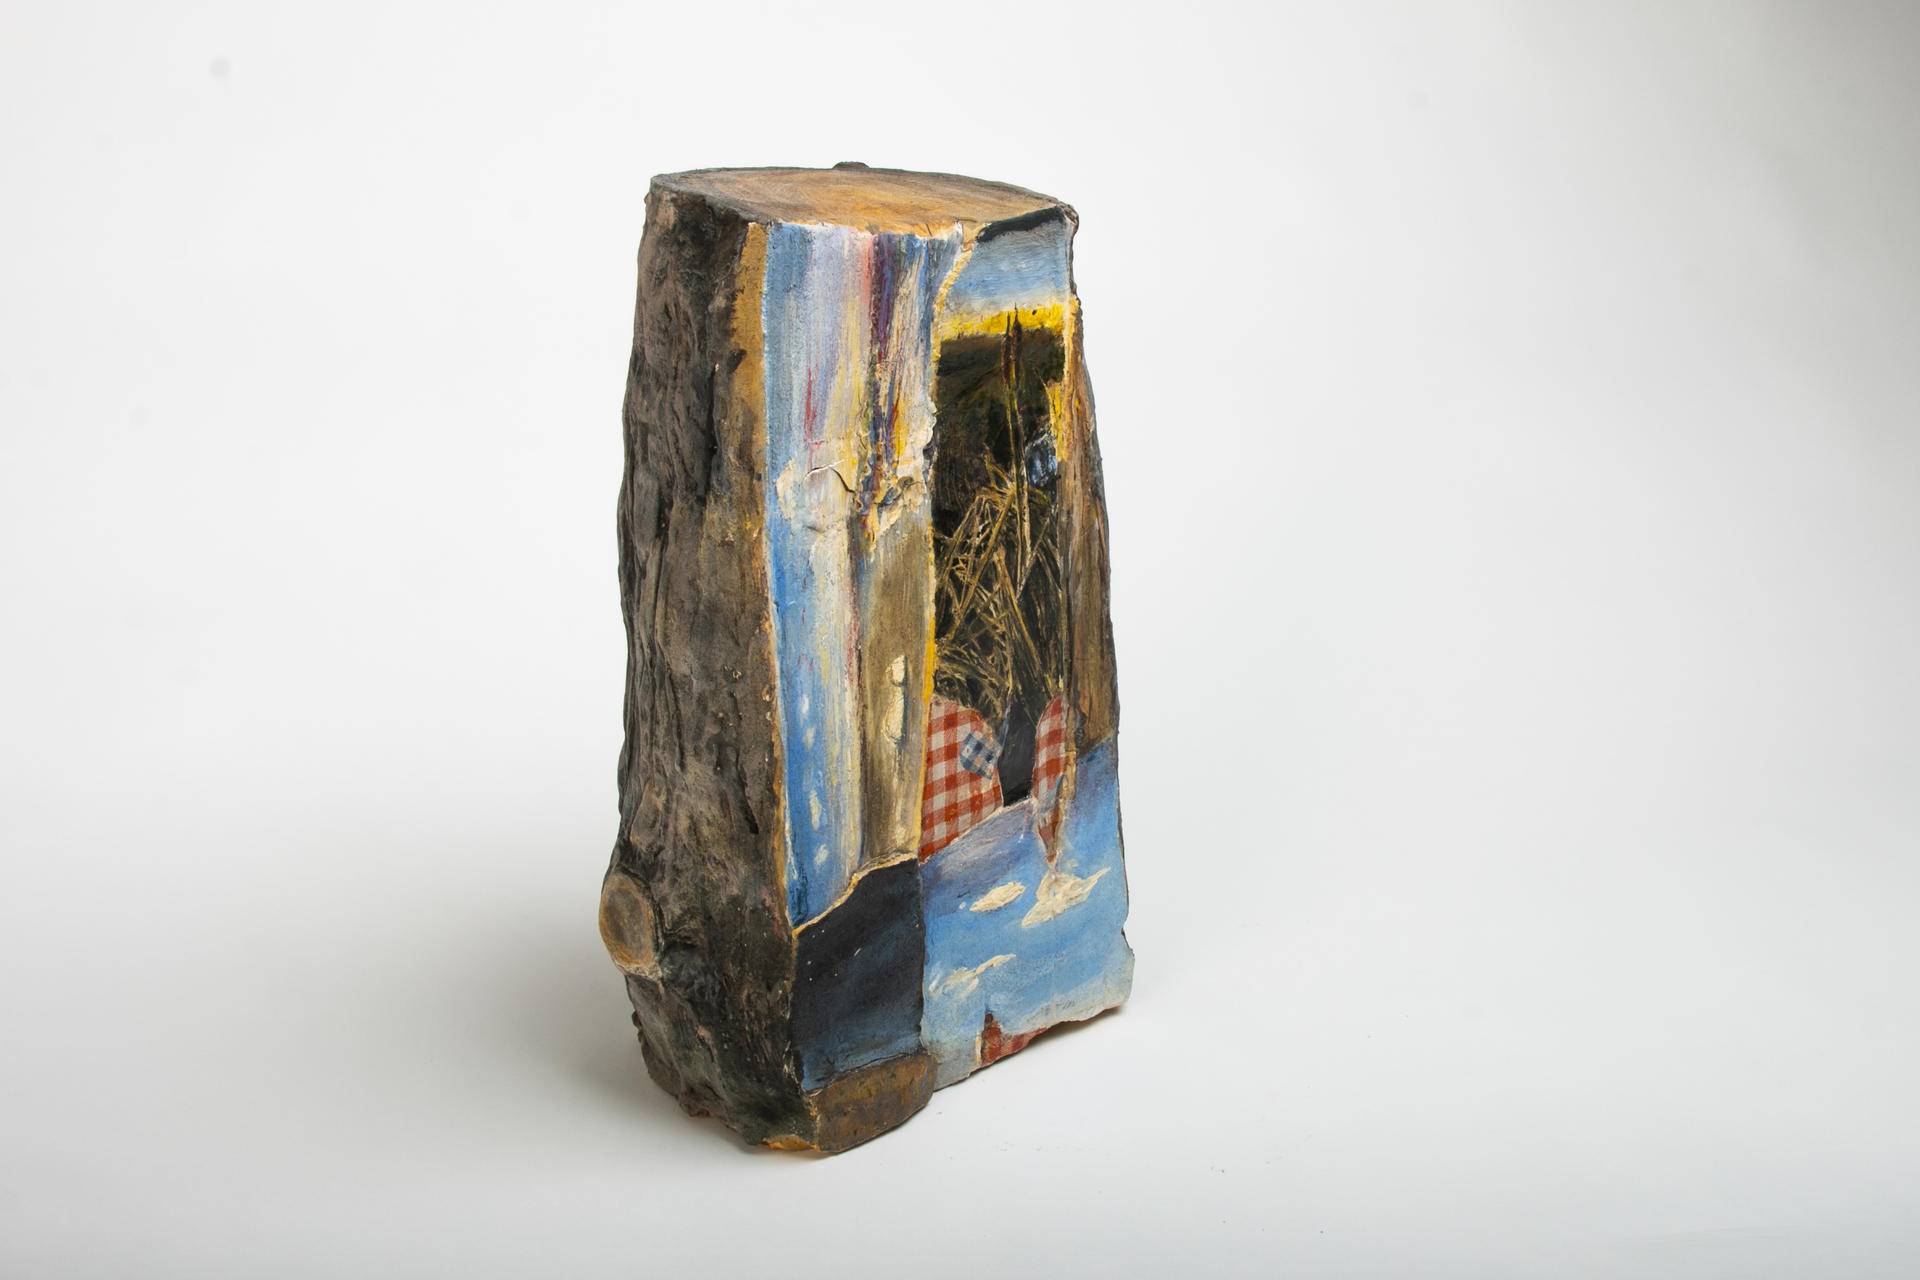 Ceramic piece resembling a cut log. The cut side of log has collaged images of the sea, cattails, and clouds.